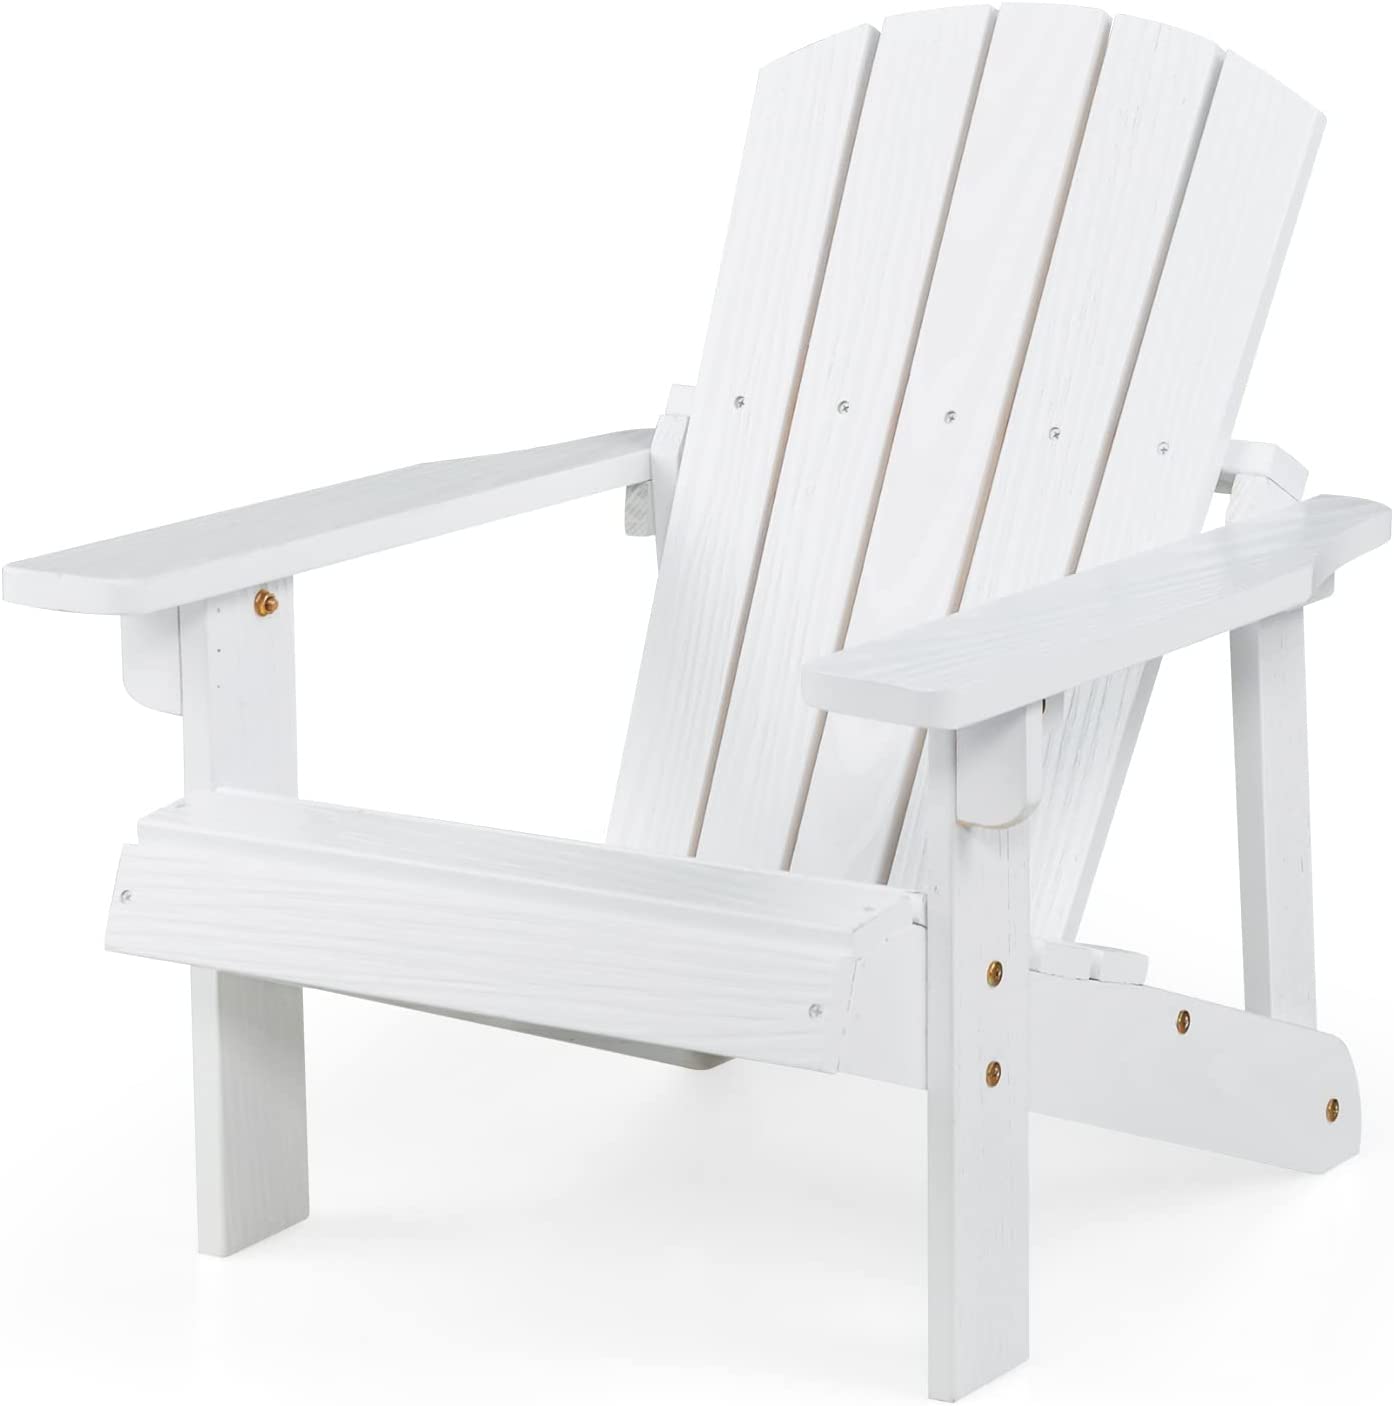 Giantex Wooden Kid's Adirondack Chair - All Weather Patio Chair with High Backrest, Arm Rest, 110 LBS Weight Capacity